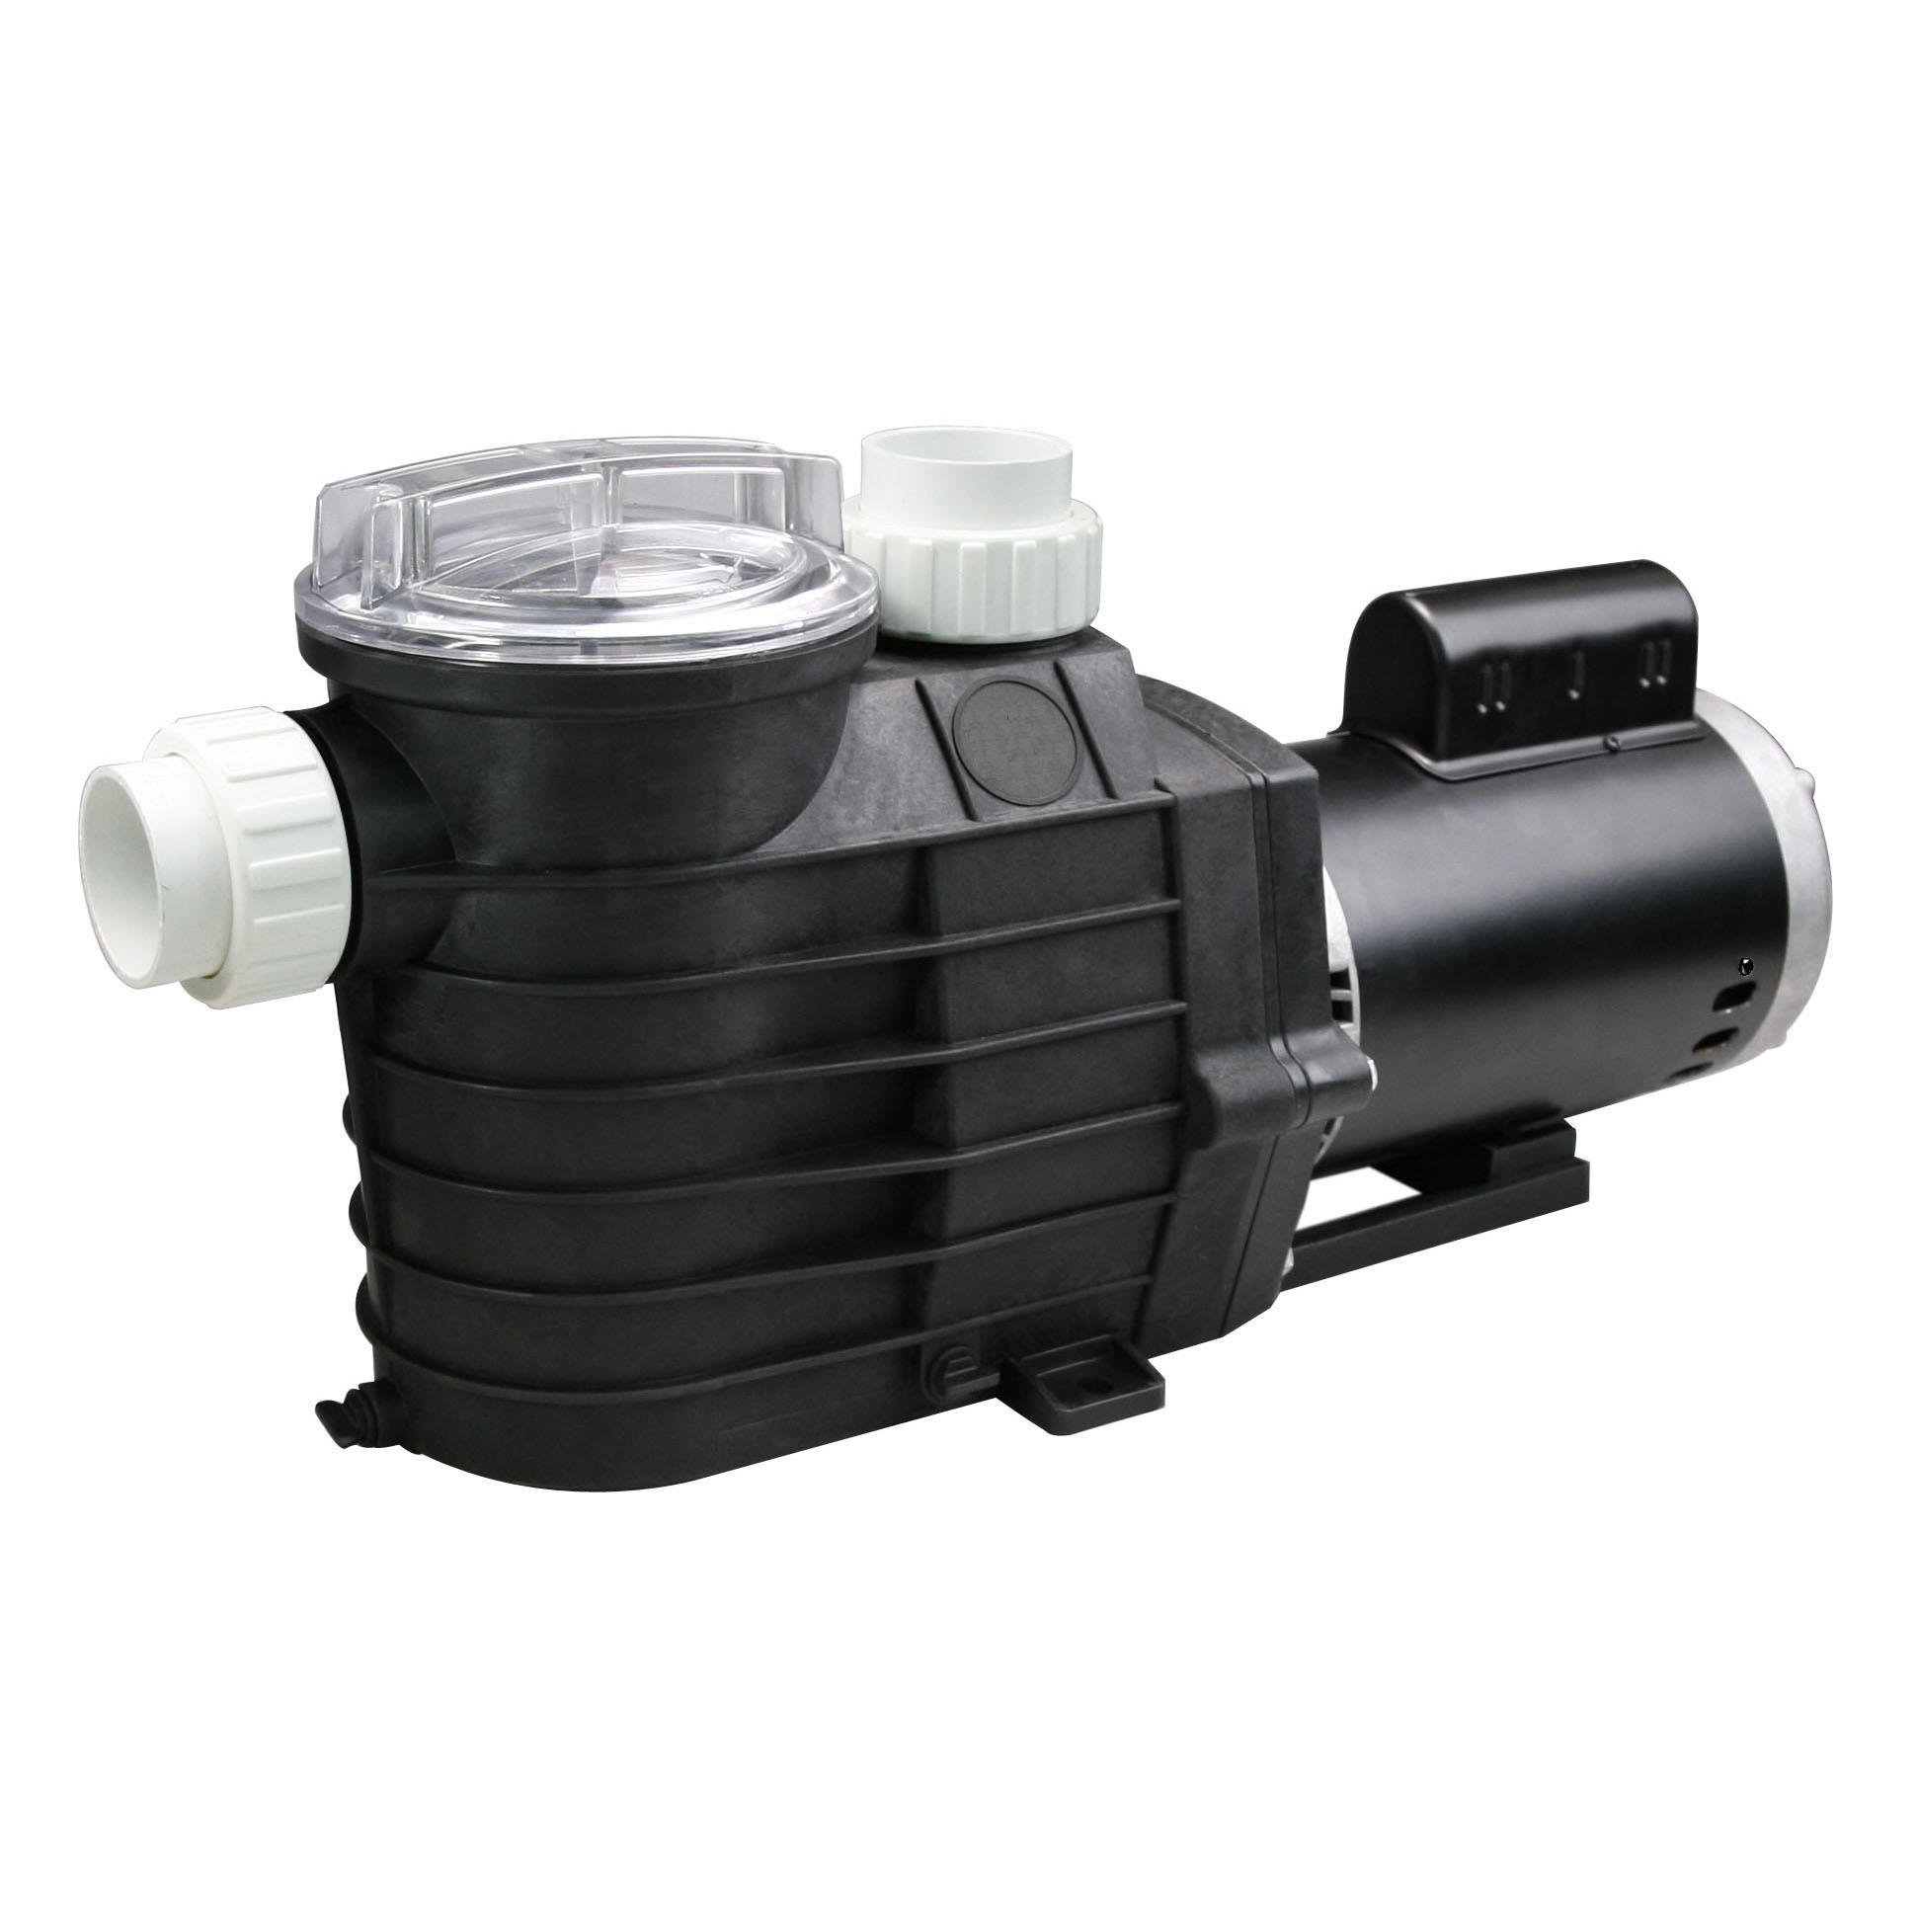 New variable speed pool pump cost pool supply for SPA pump-1